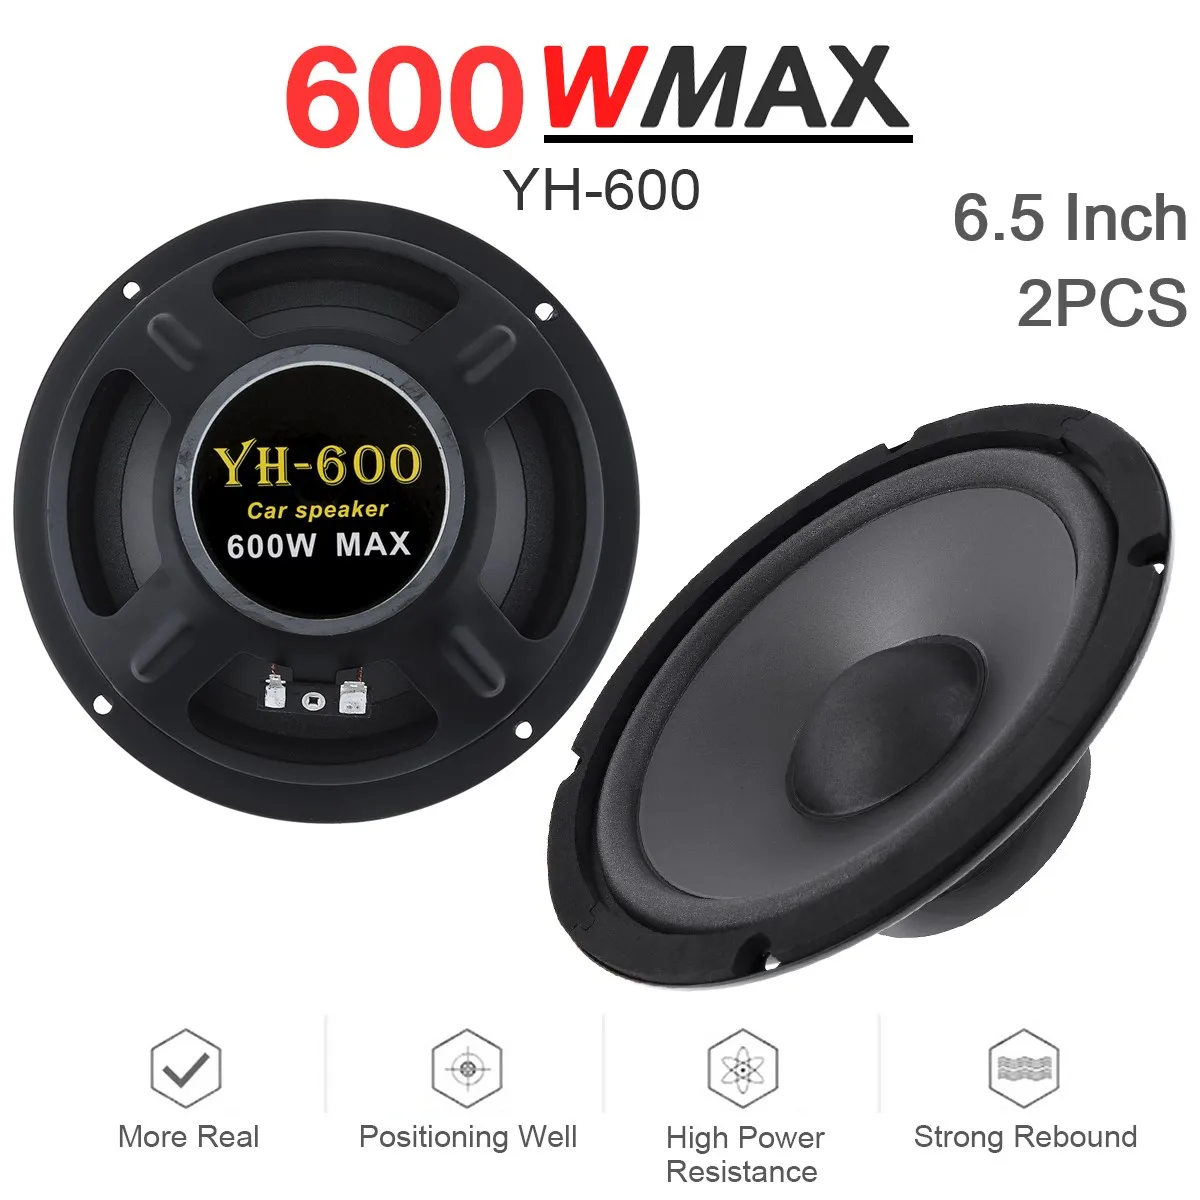 2 Pieces 600W 6.5 Inch 2-Way Car Speaker Auto Door Audio Music Stereo Subwoofer Full Range Frequency Automotive Speakers